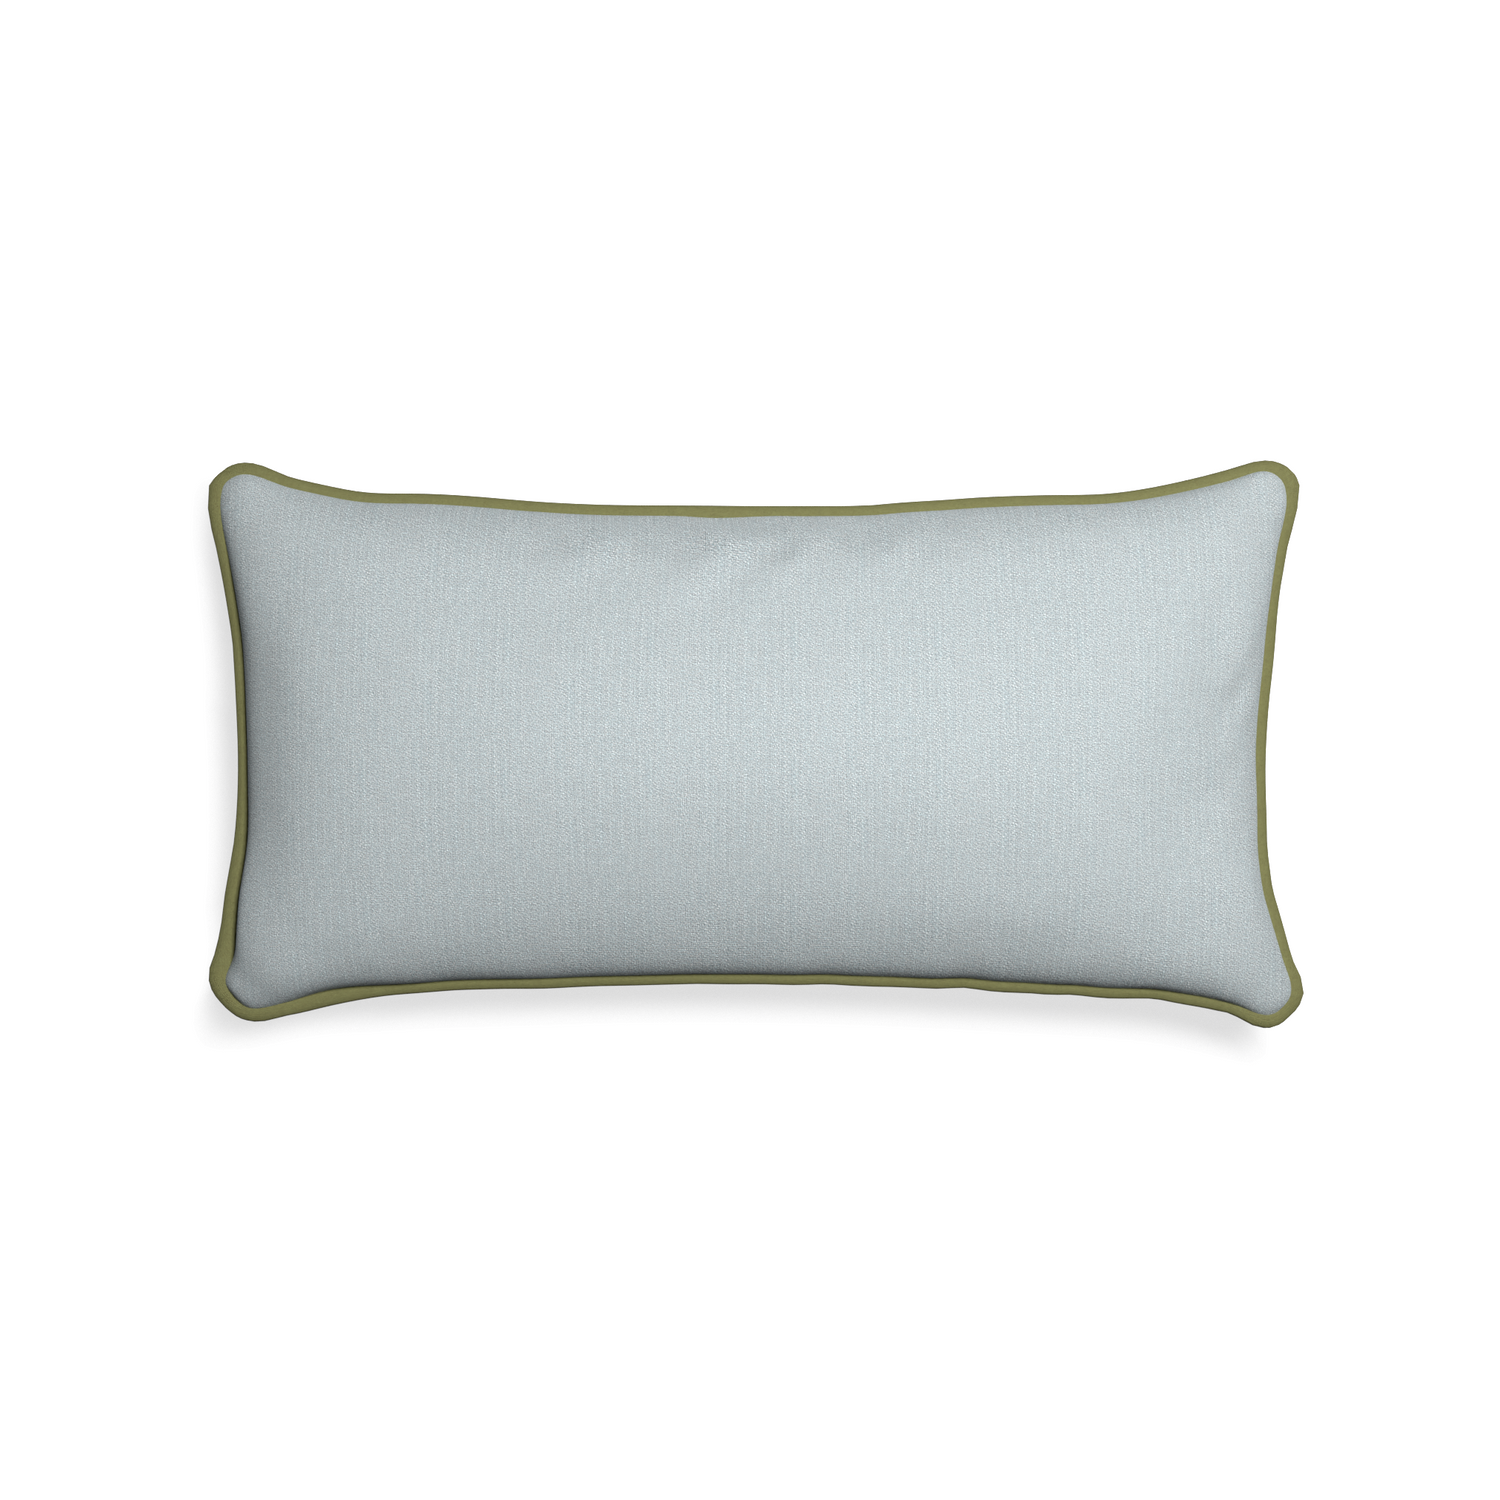 Midi-lumbar sea custom grey bluepillow with moss piping on white background